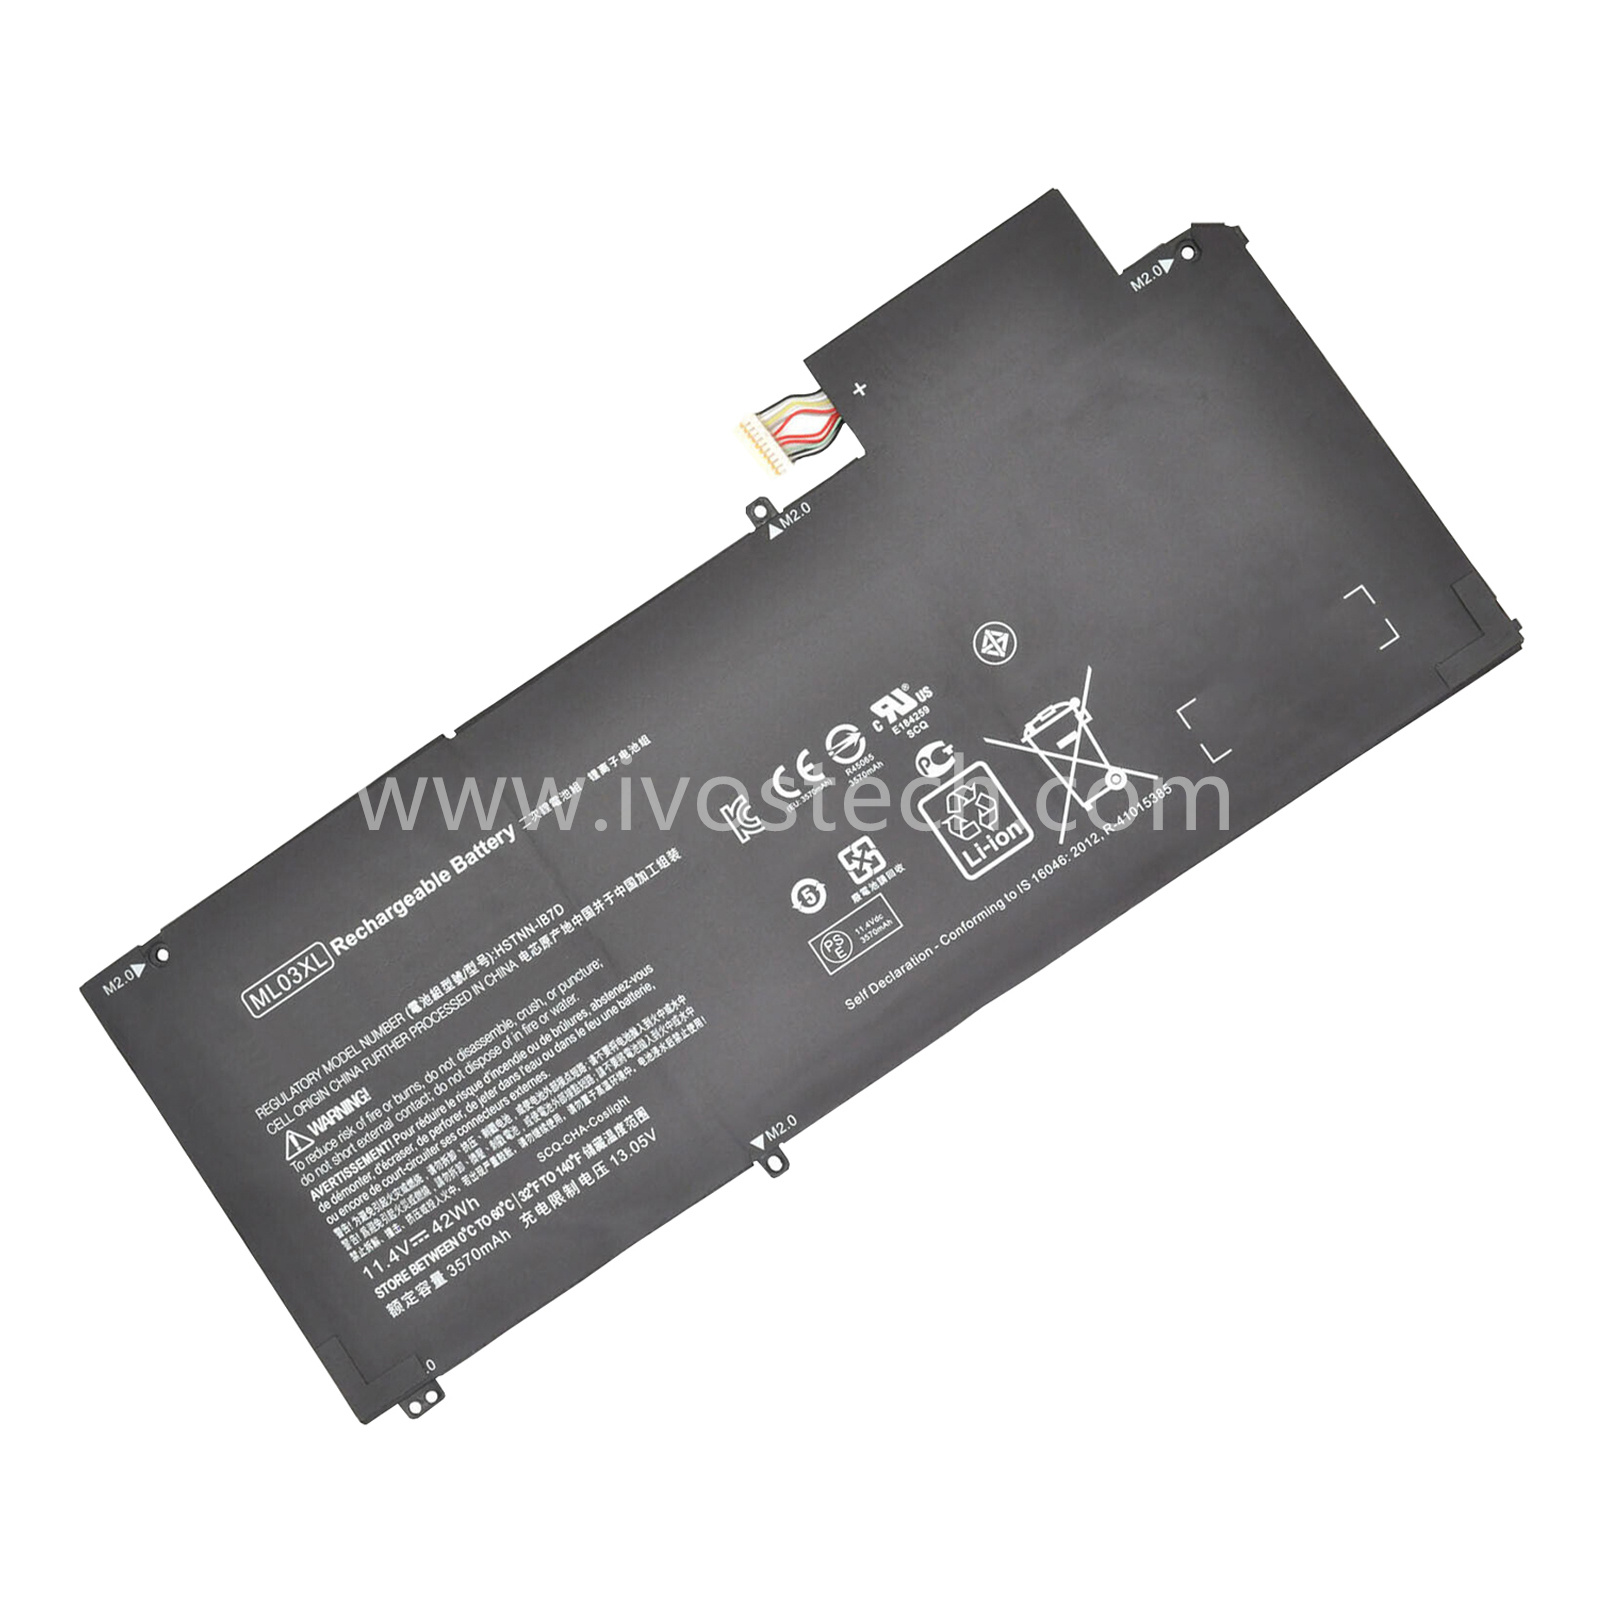 ML03XL 42Wh 11.4V Replacement Laptop Battery for HP Spectre X2 Detachable 12 Spectre x2 12-A001DX 12-A003NG 12-A006TU Series